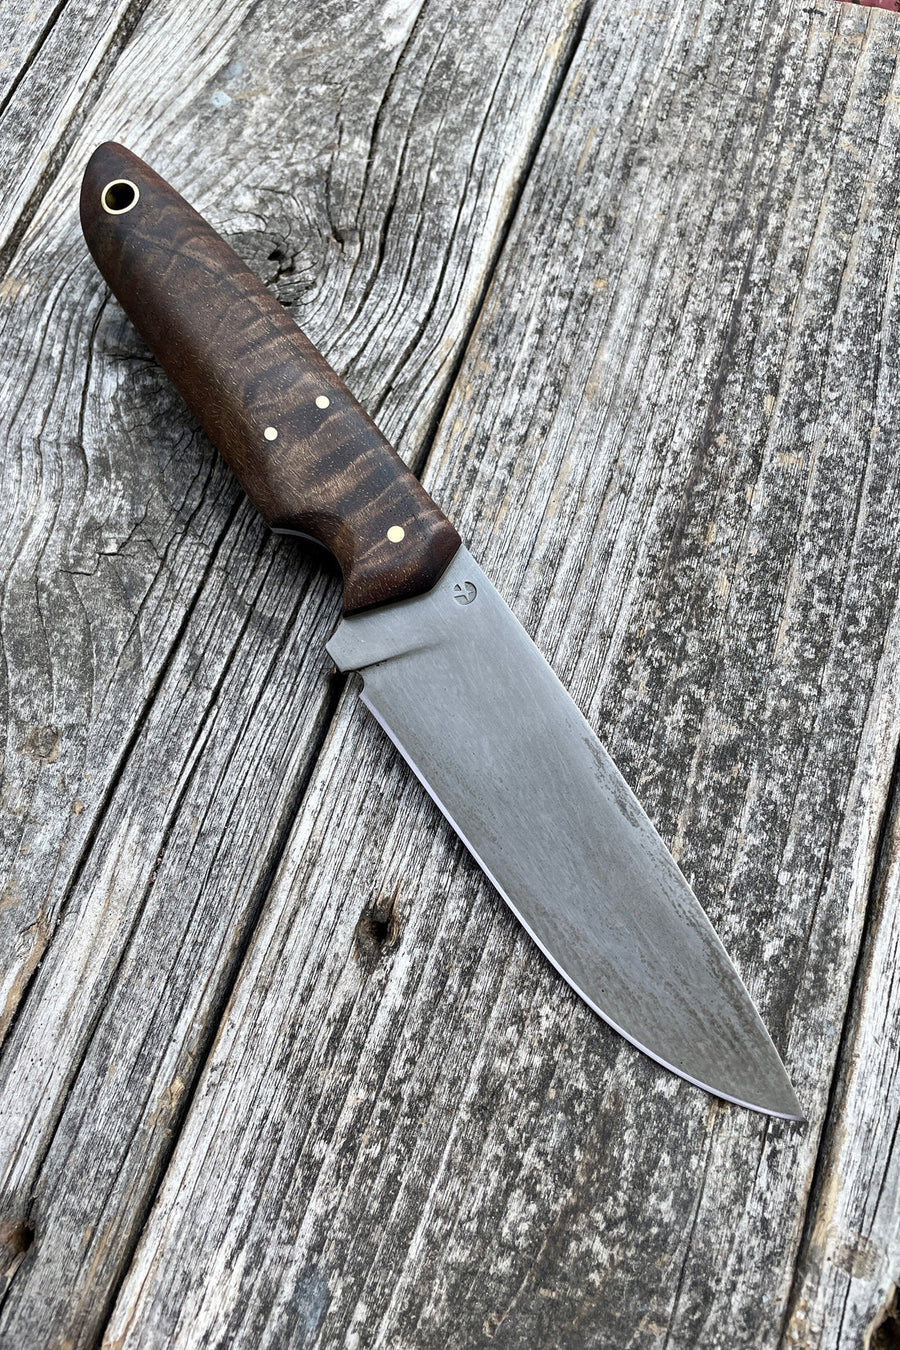 The Drop-Point Harvester knife. Carbon steel harvest knife. Handmade in the USA. Redroot Blades.